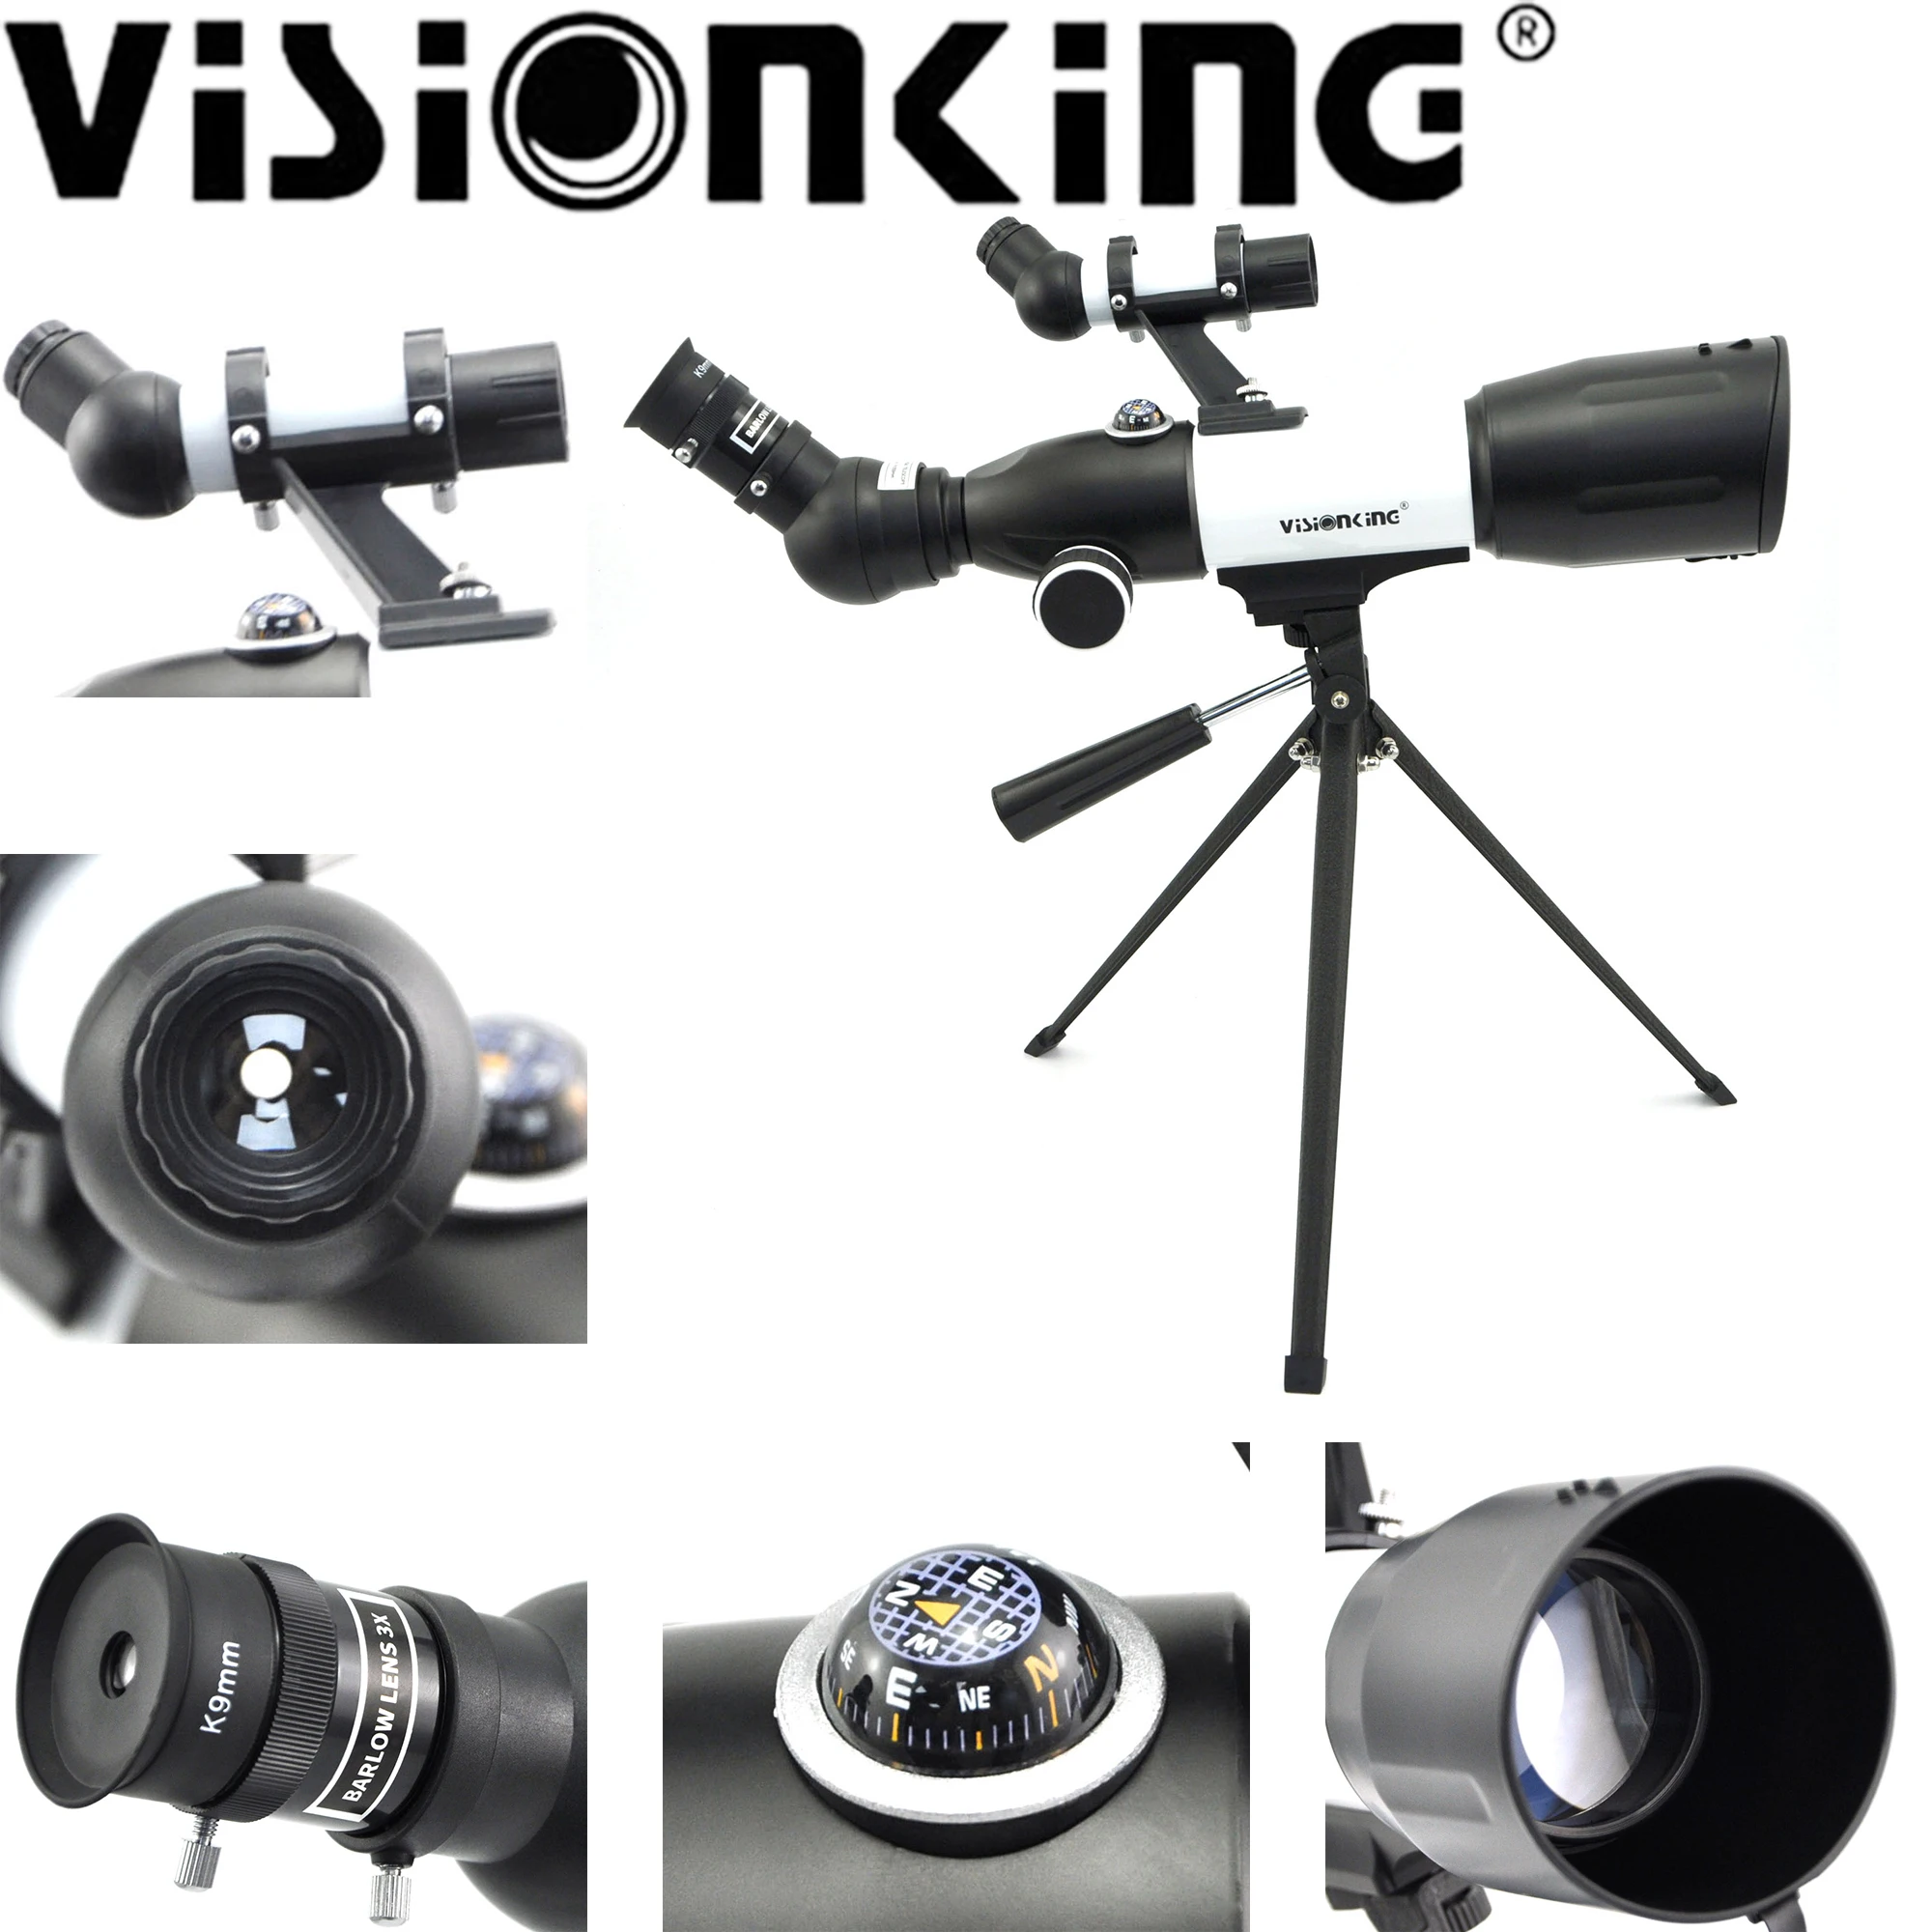 Visionking 50350CF Refraction Astronomical Telescope Monocular Astronomy Scope Sight For Moon Space Observations With Tripod